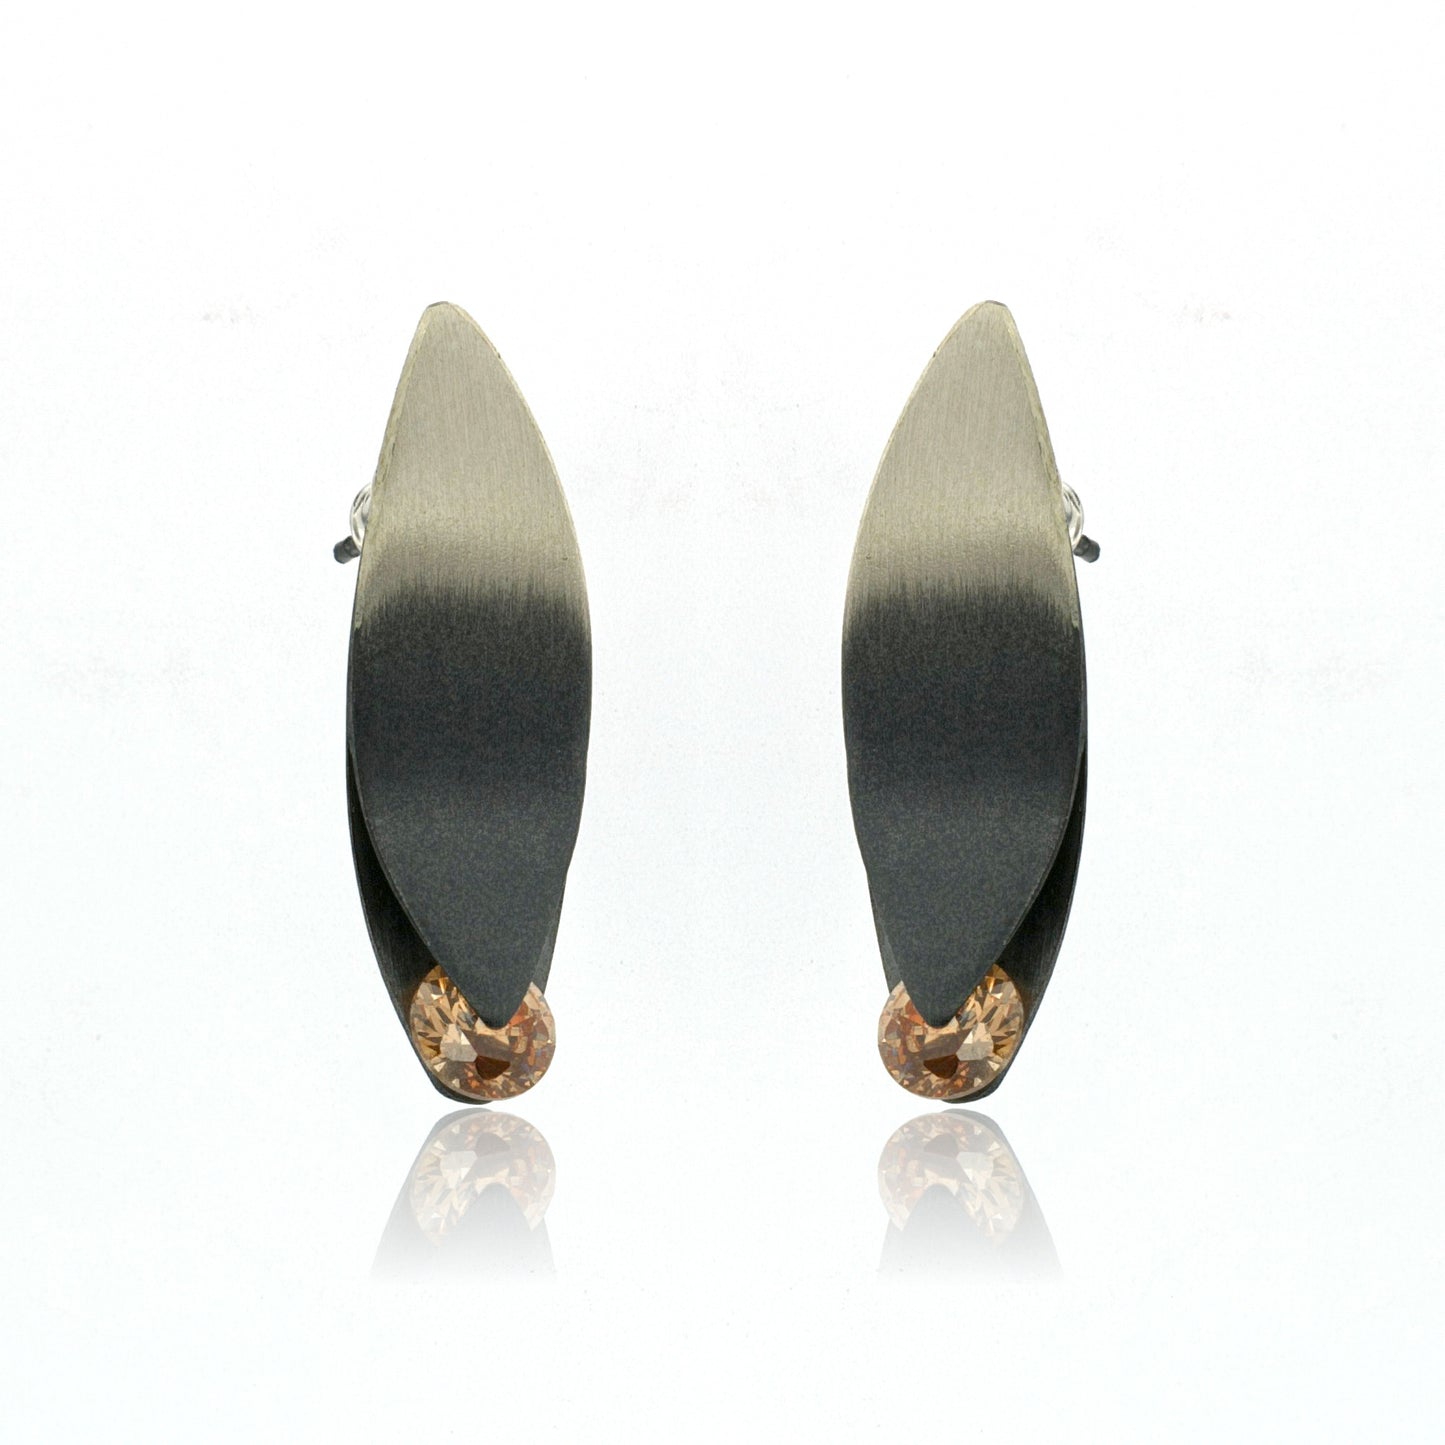 Mysterium Collection Oxidized Sterling Silver Earrings